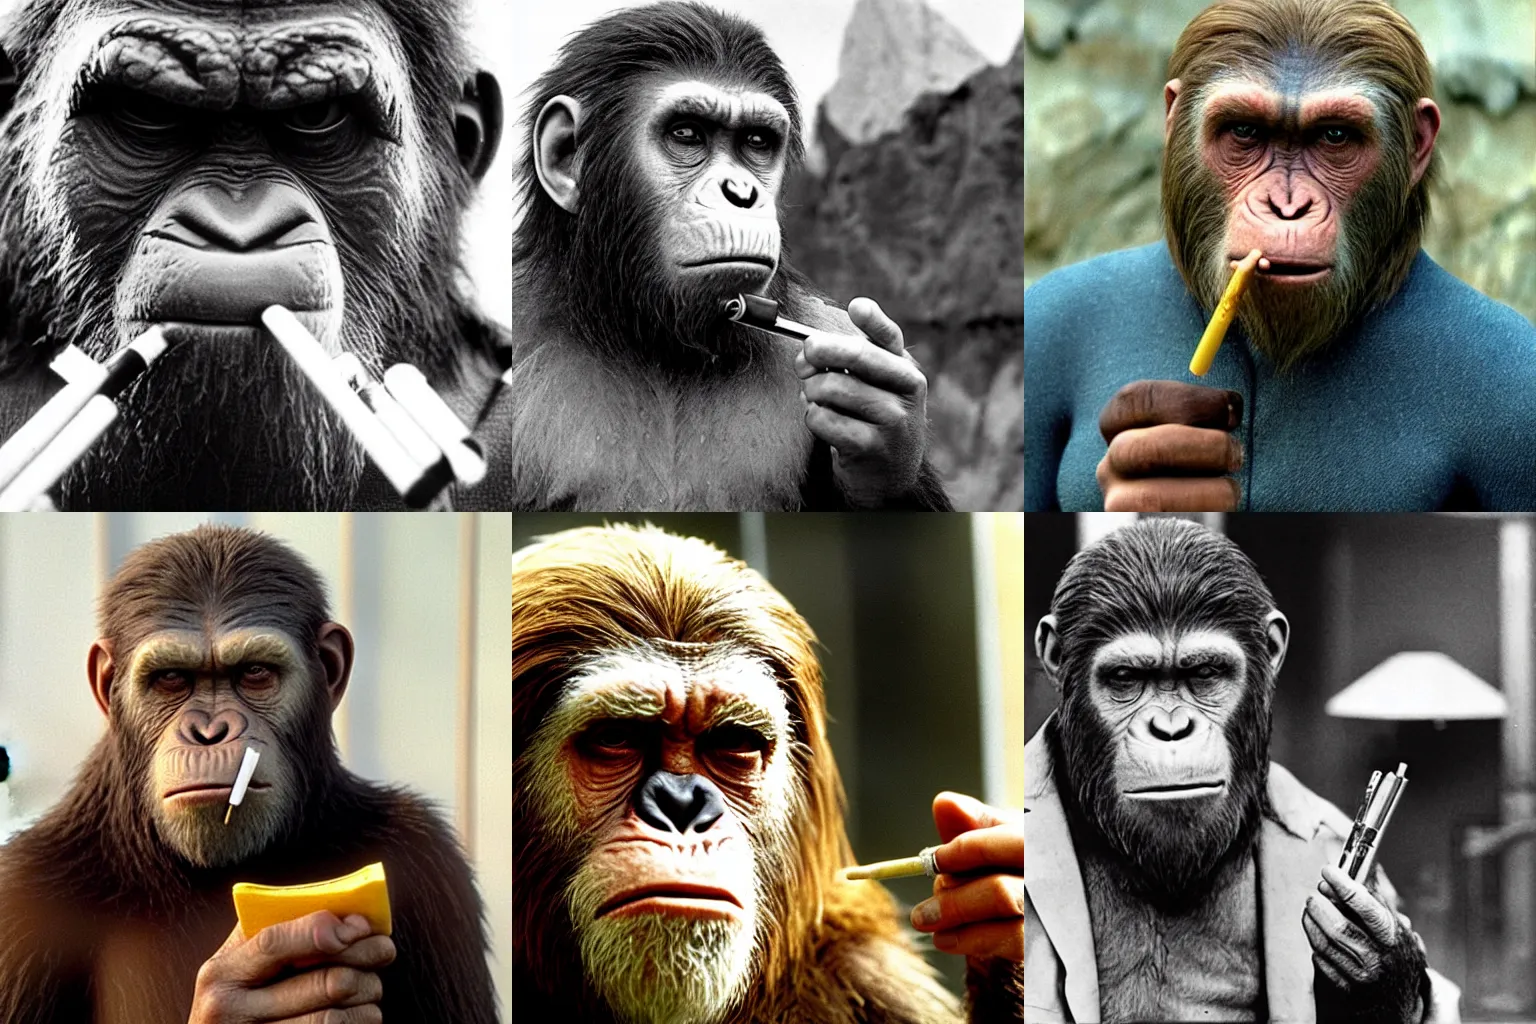 Prompt: Planet of the Apes Film still of Doctor Zaius smoking a cigarette